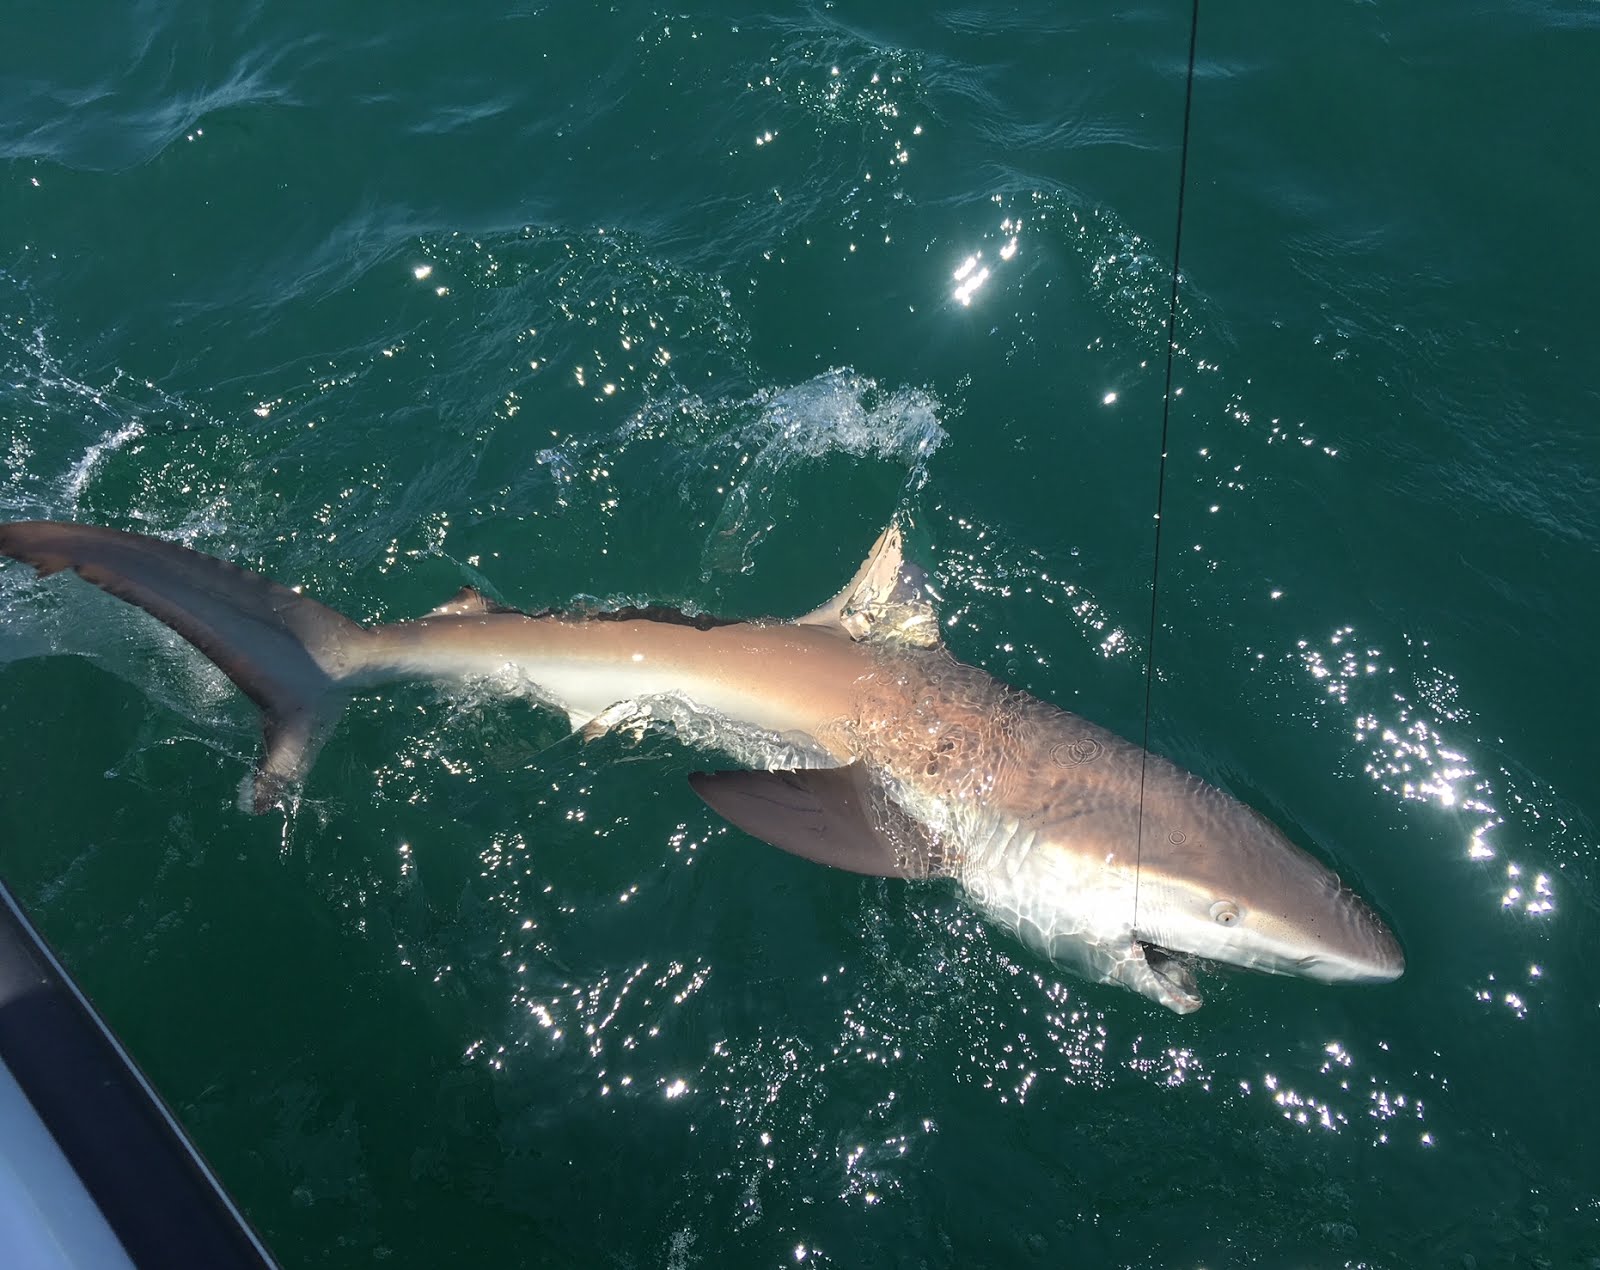 Jersey Cape Guide Service: The Sharks are Here!